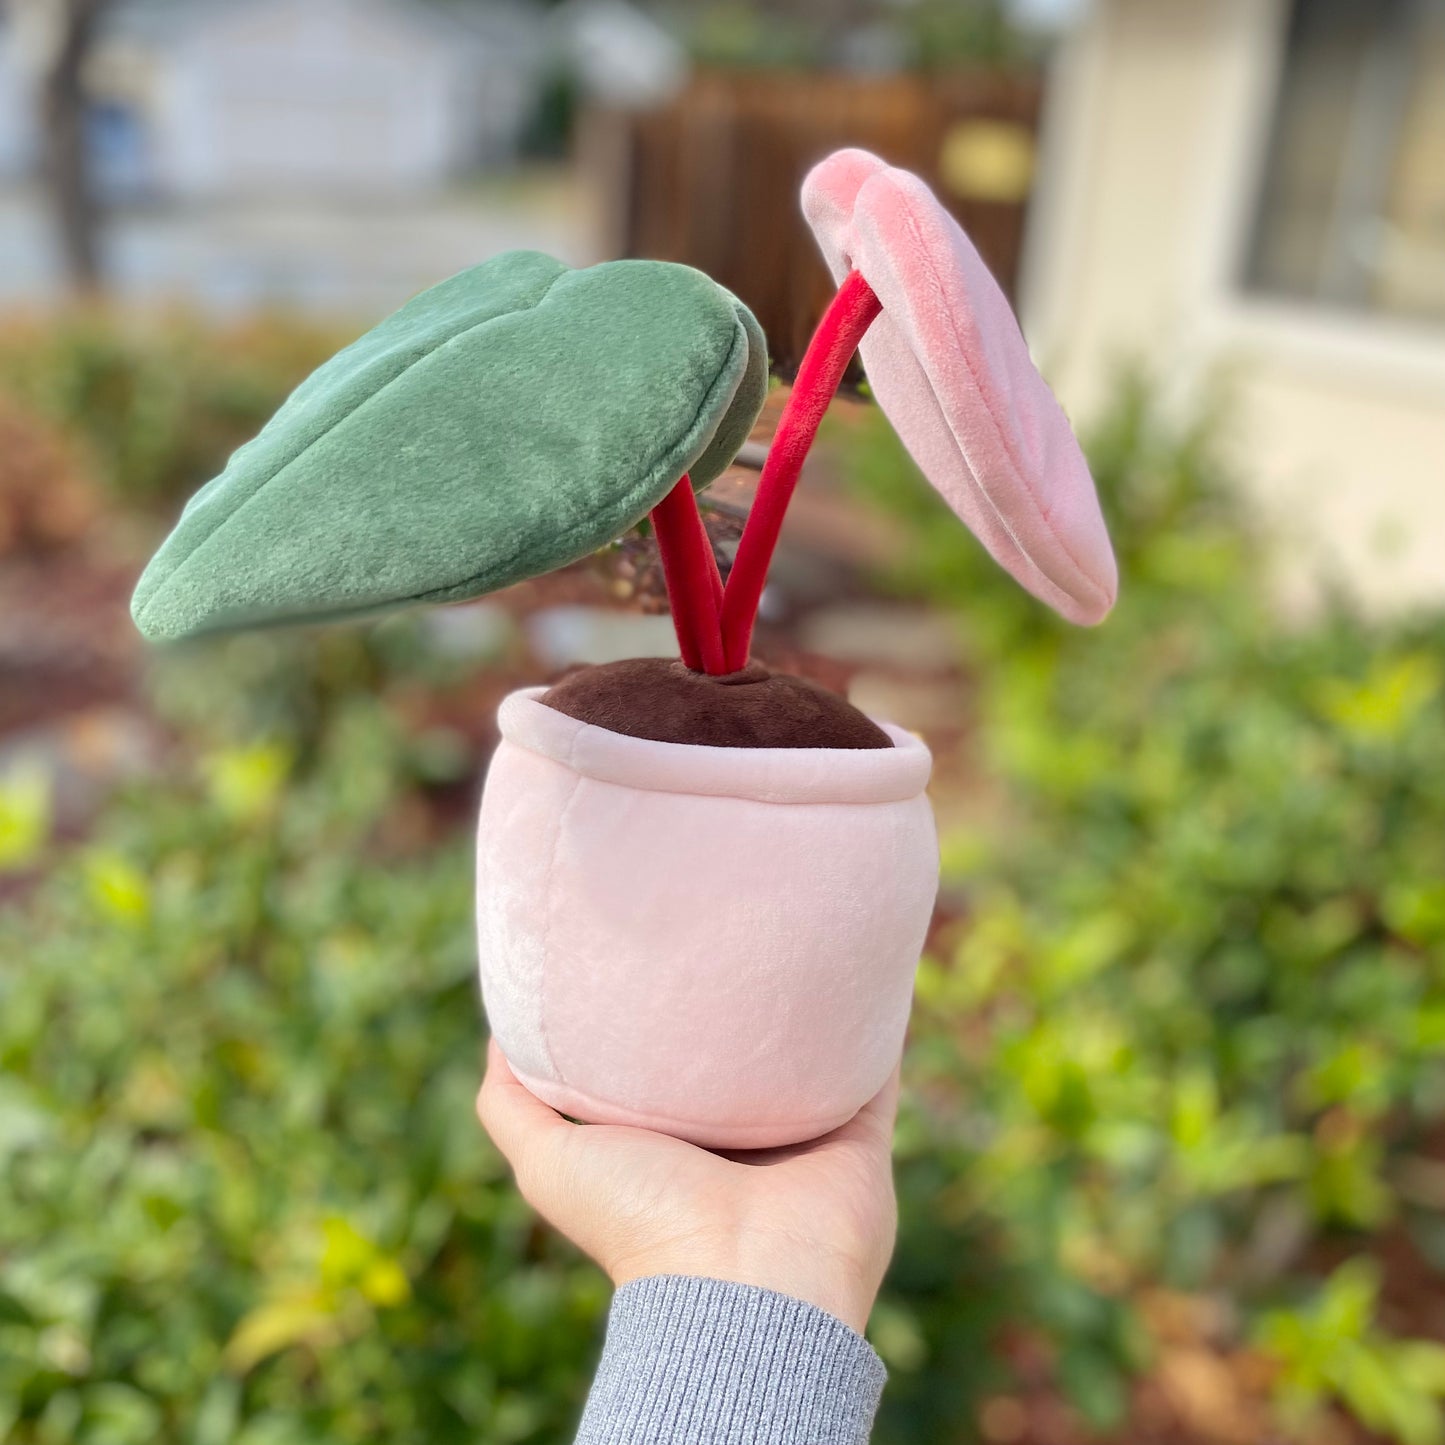 Rear view of the plush toy of a potted plant with a pink pot, held by a woman's hand in front of a bush. The plant is a pink princess philodendron with three leaves. One leaf is green, another leaf is pink, and the third leaf has a split color pattern with the left side green and the right side pink. The dark red stems of the plant are visible.